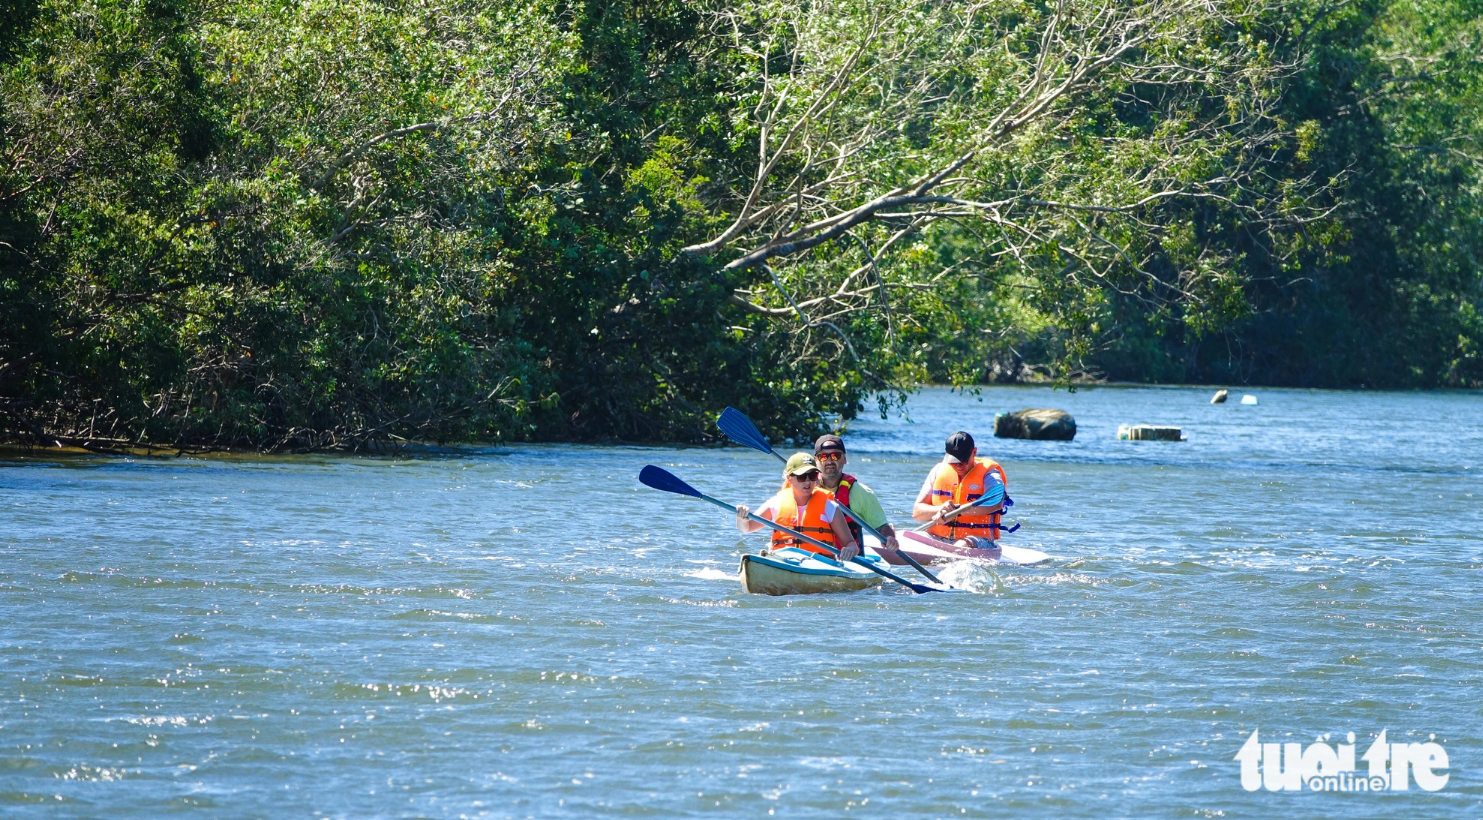 Foreign visitors go kayaking for some two kilometers in the Cua Can River to explore the natural beauty of the river. Photo: Chi Cong / Tuoi Tre